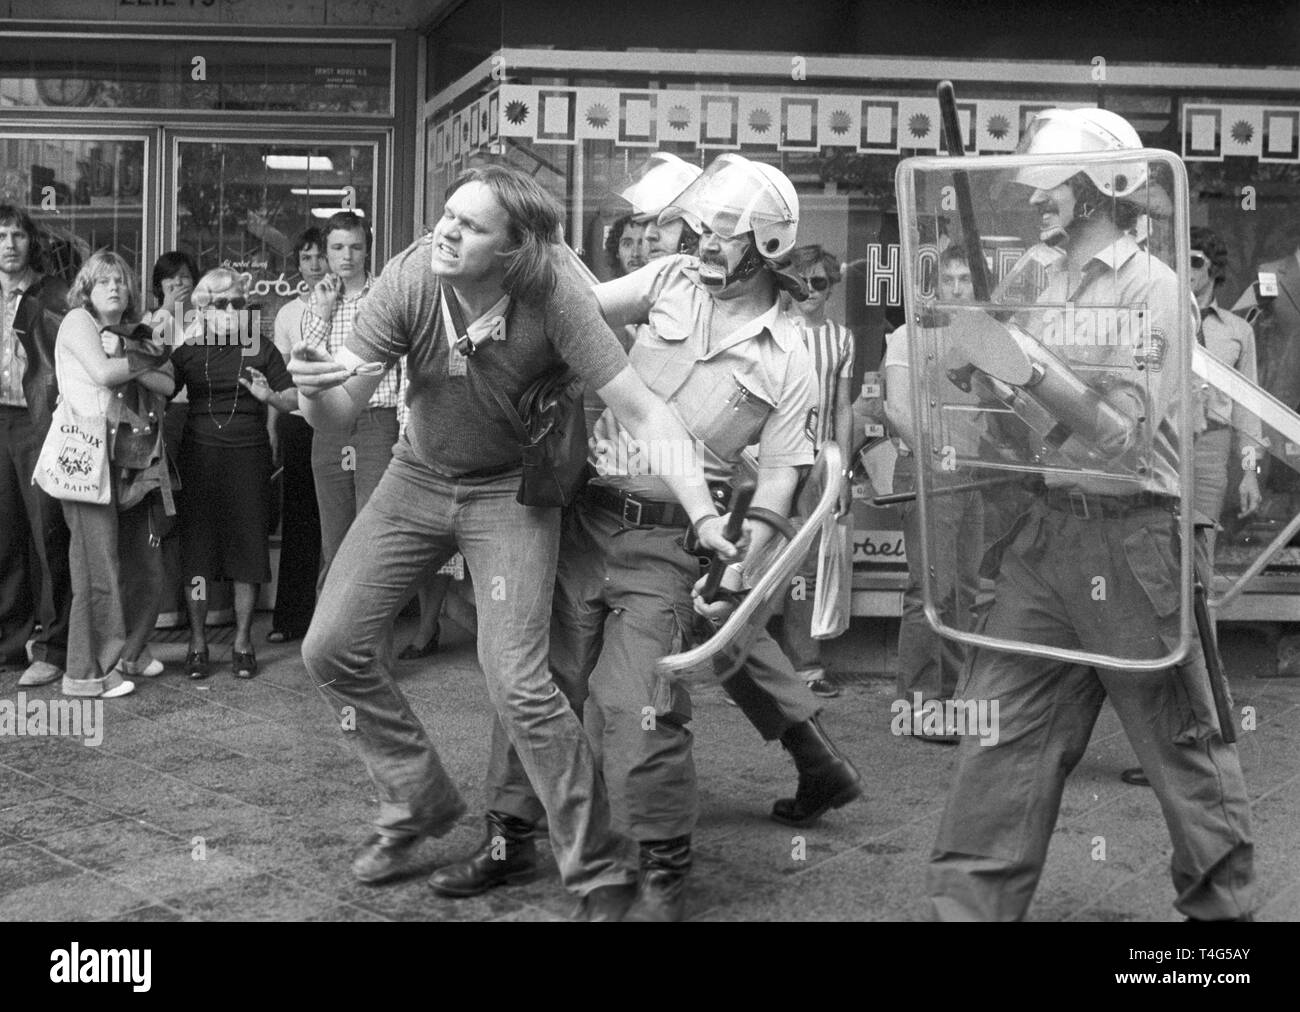 Clashes between protestors and police during a demonstration in Frankfurt on 10 May 1976 with around a dozen policemen injured and seven demonstrators arrested. They protested the death of terrorist Ulrike Meinhof who commited suicide on 5 May 1976. | usage worldwide Stock Photo